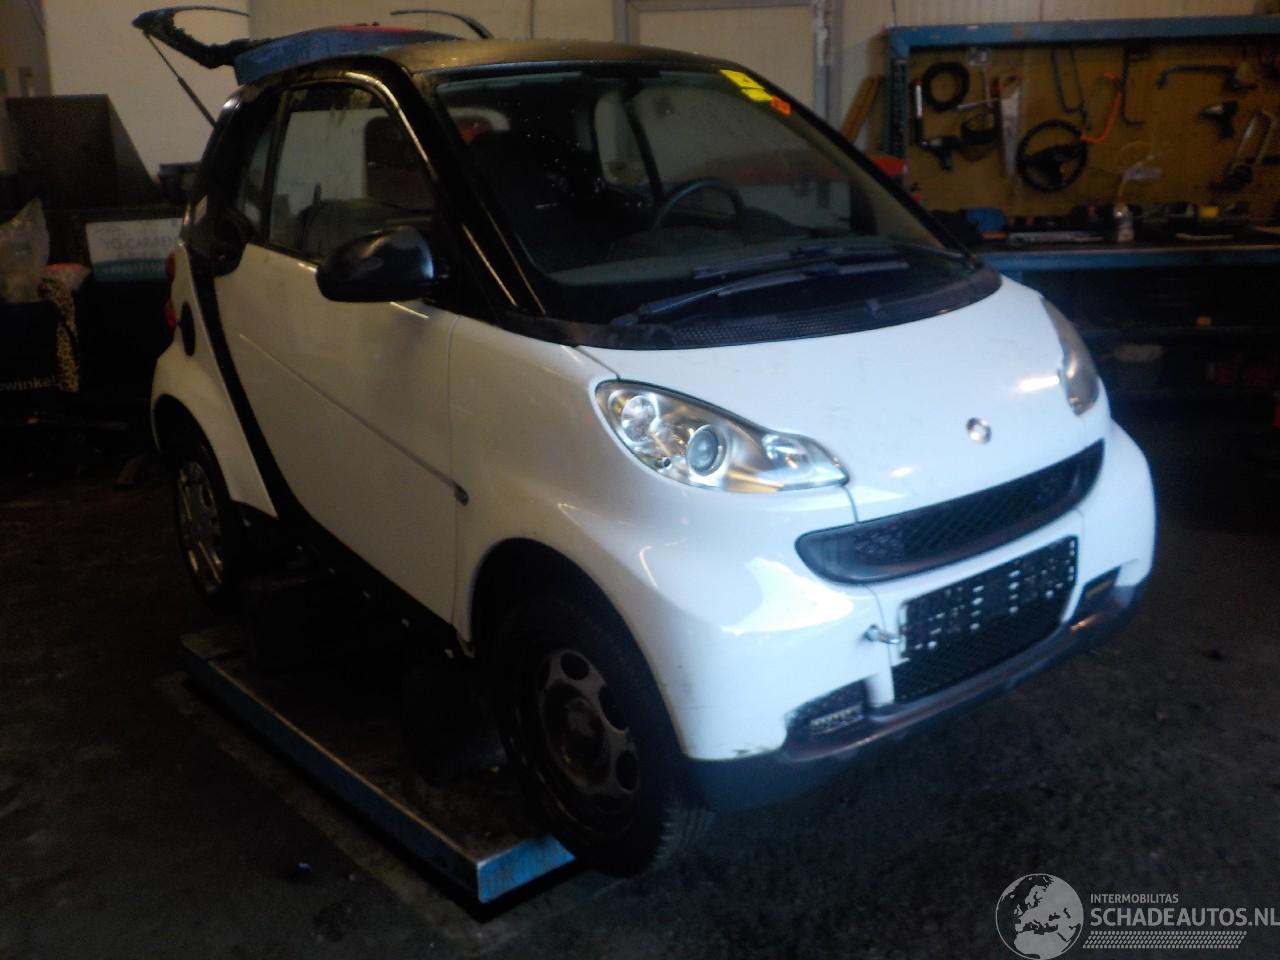 Smart Fortwo Fortwo Coupé (451.3) Hatchback 3-drs 0.8 CDI (660.950) [33kW]  (01-2=
007/07-2009)